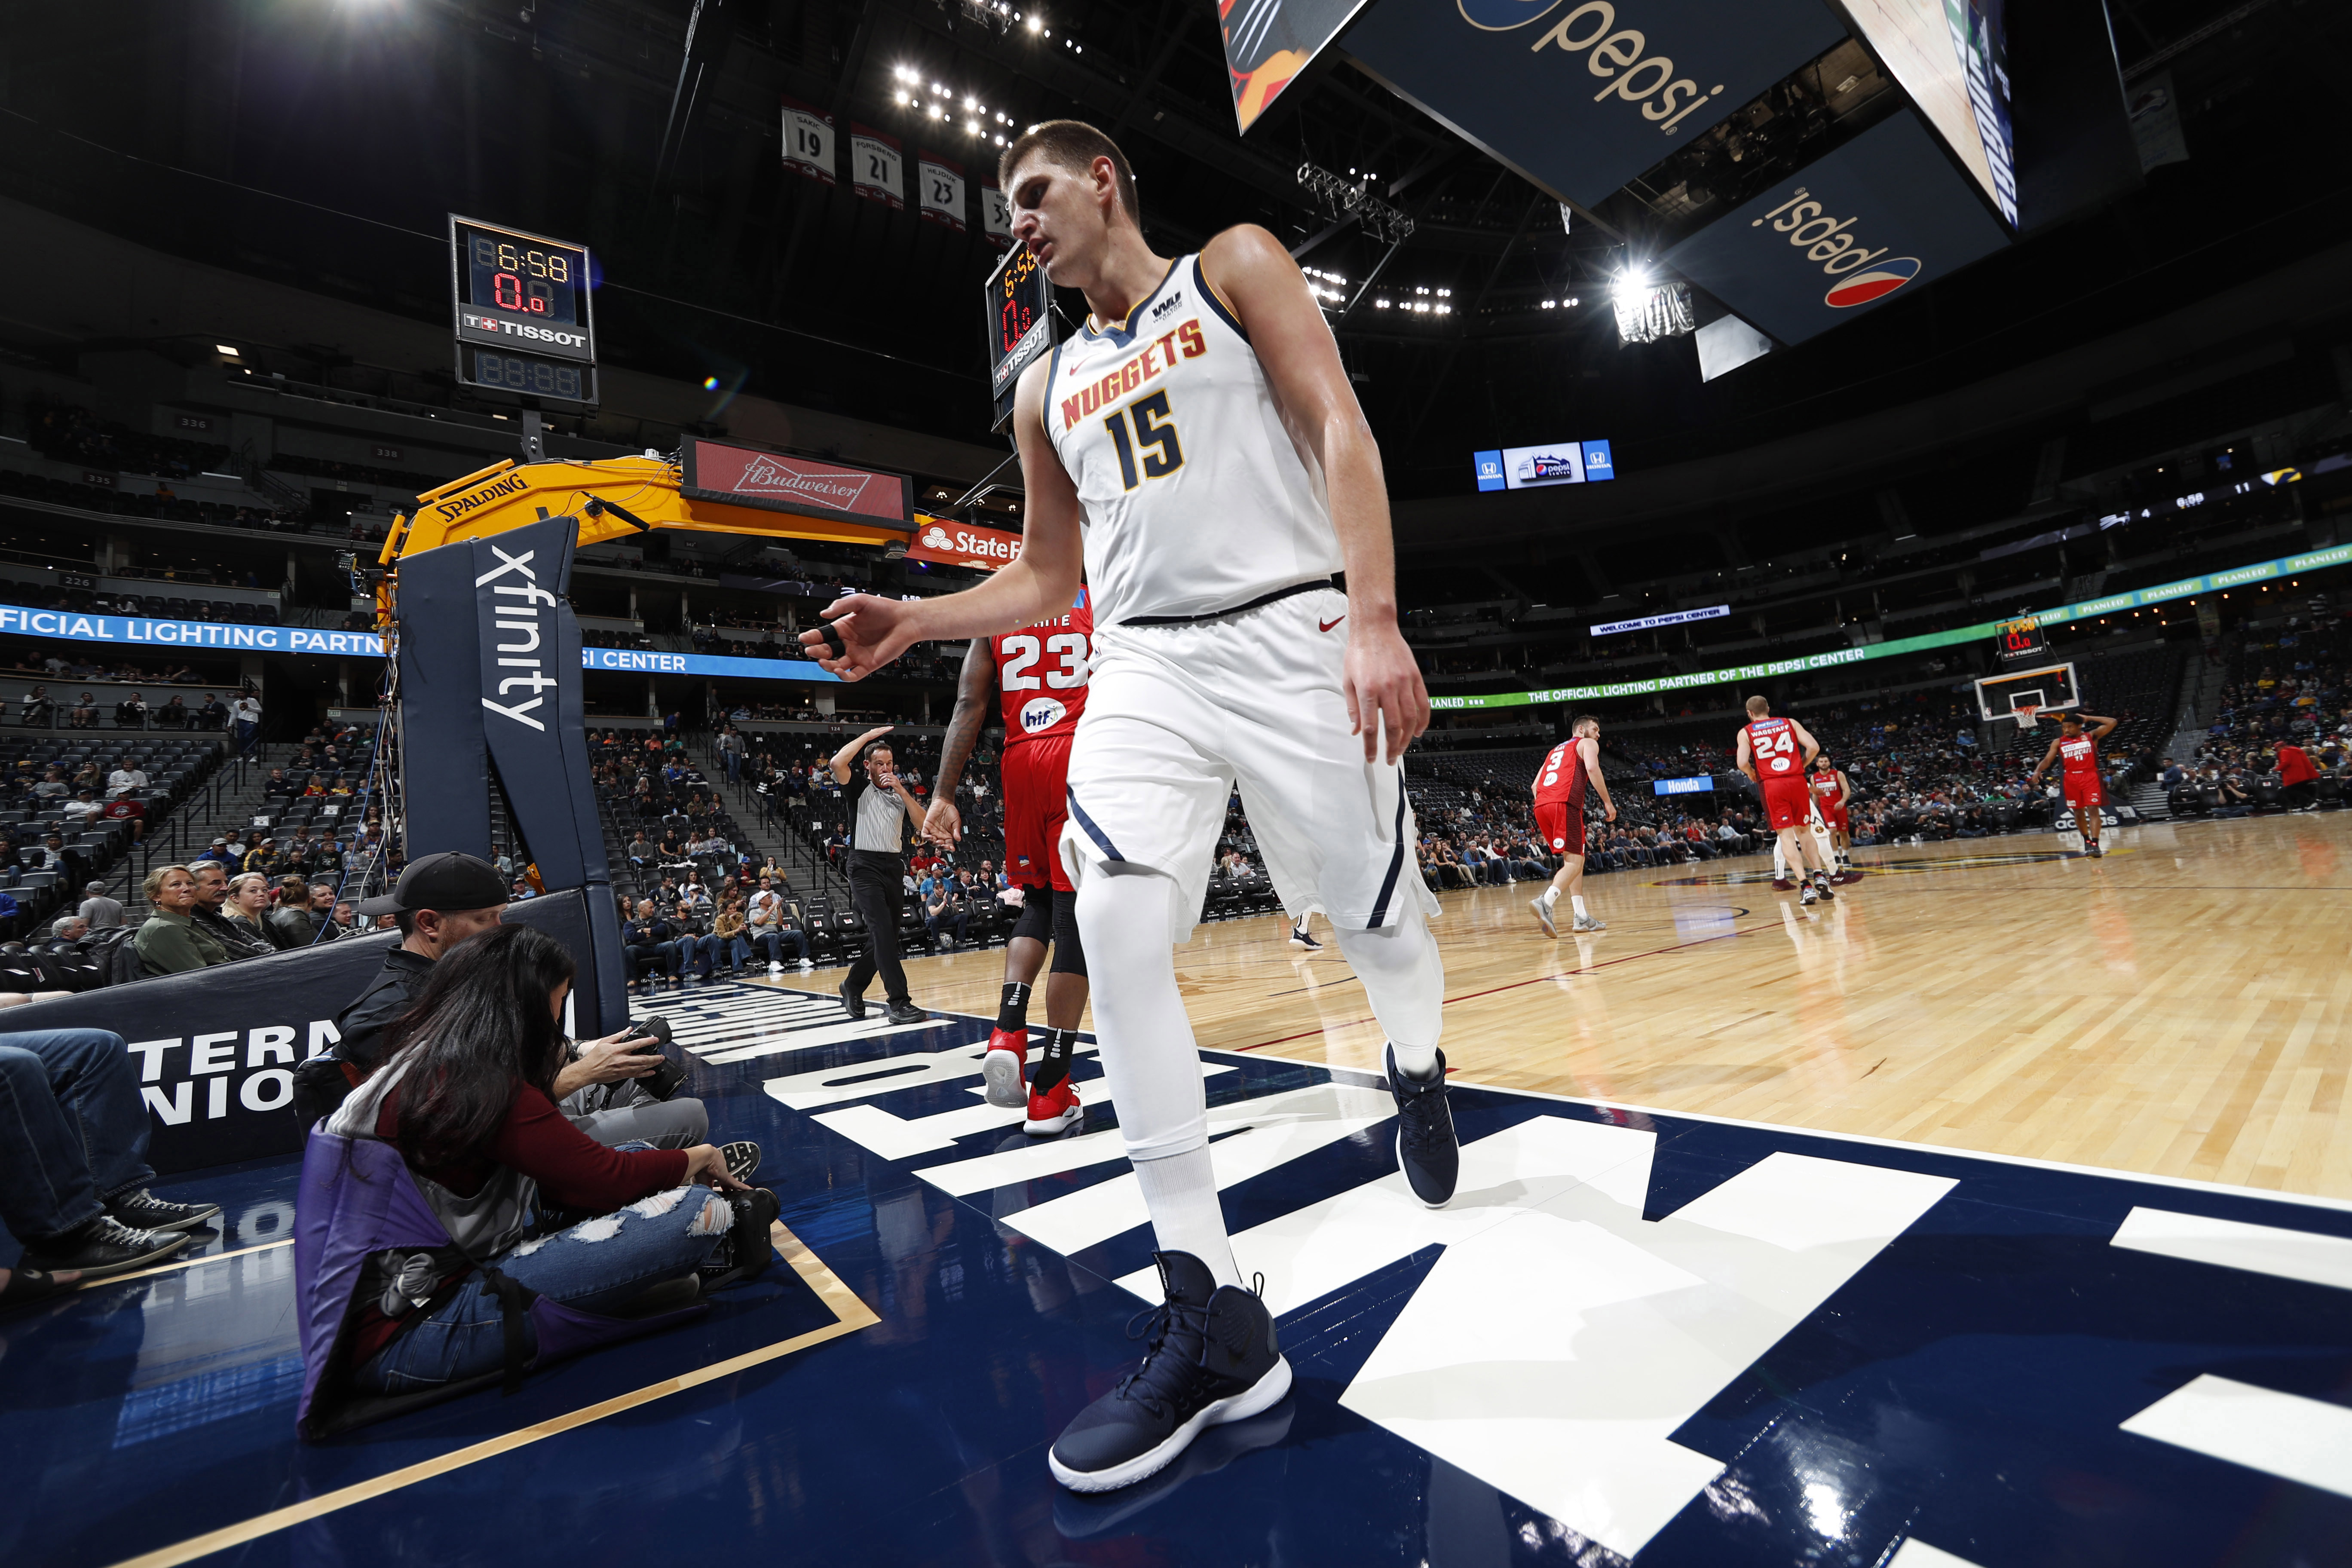 With new deal, Jokic sets aim at leading Nuggets to playoffs